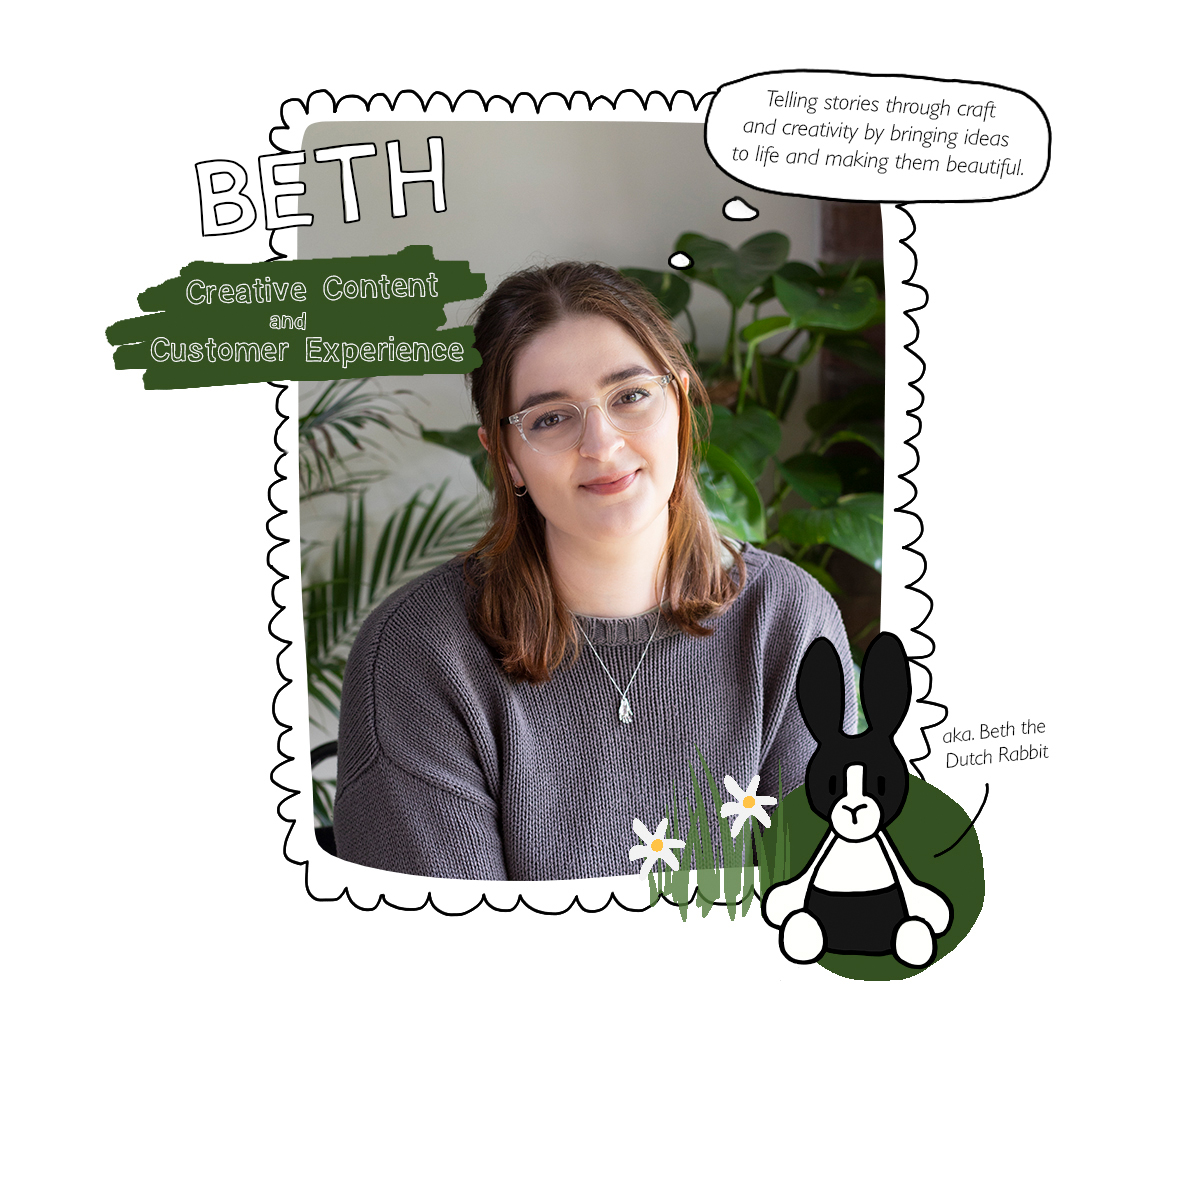 Beth: Artistic Assistant and Content Creator